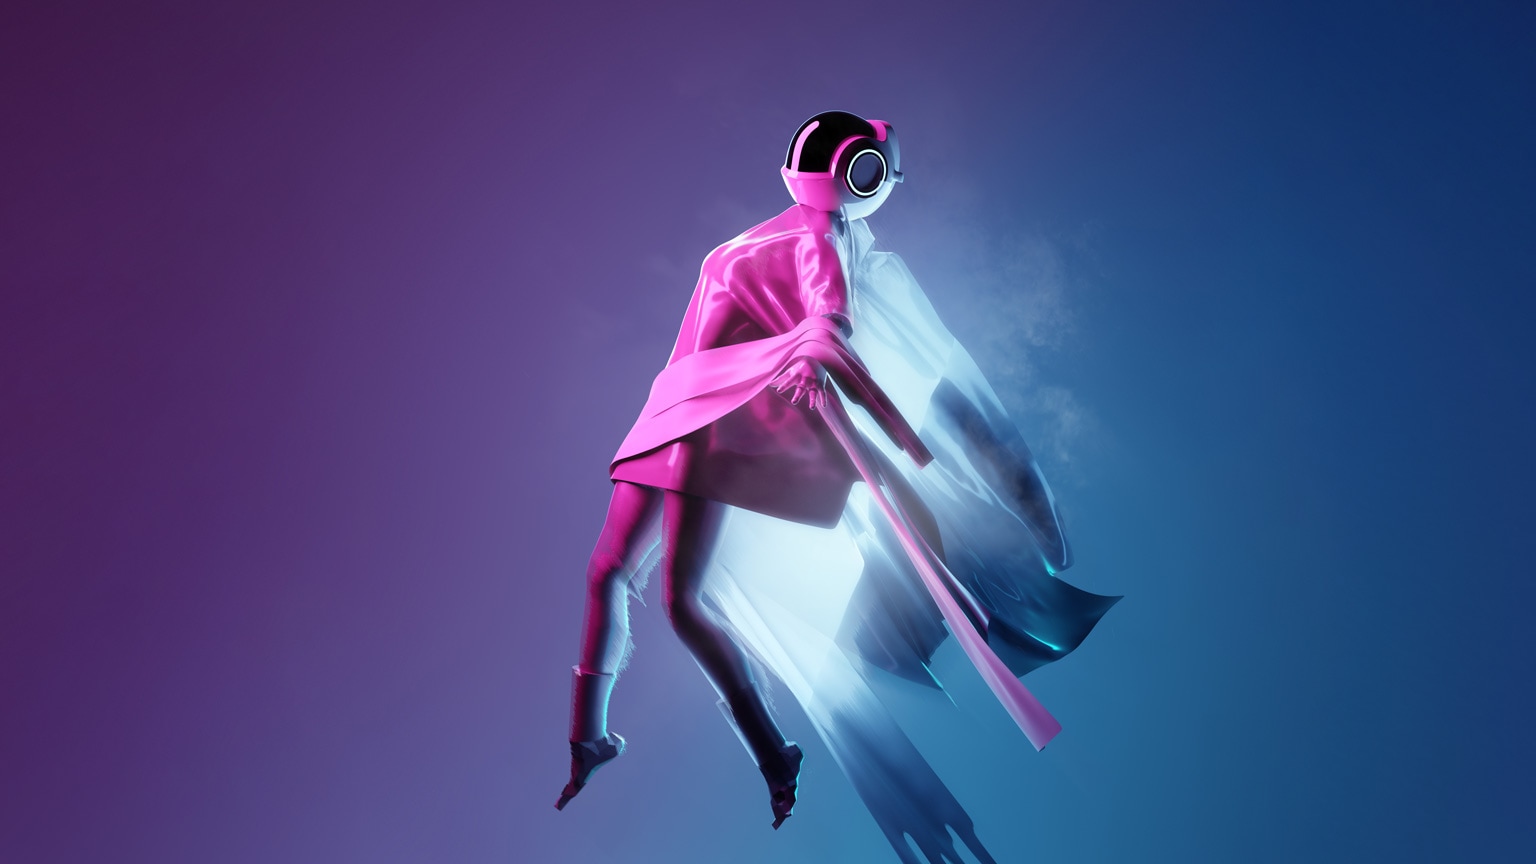 Image of a futuristic space woman floating away